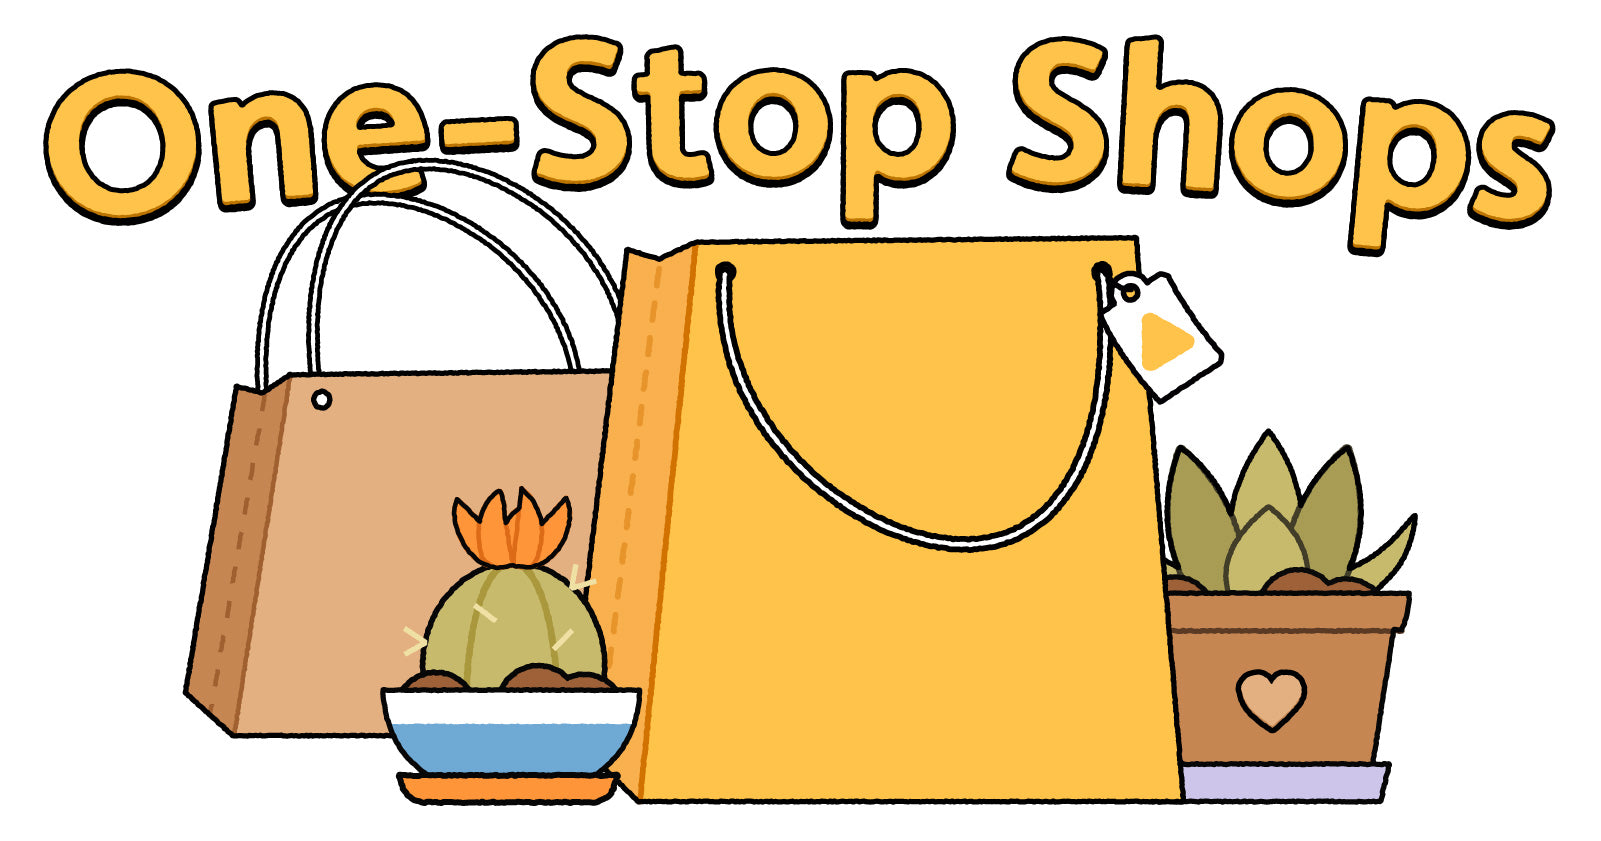 One-Stop Shops - shopping bag illustrations with succlents